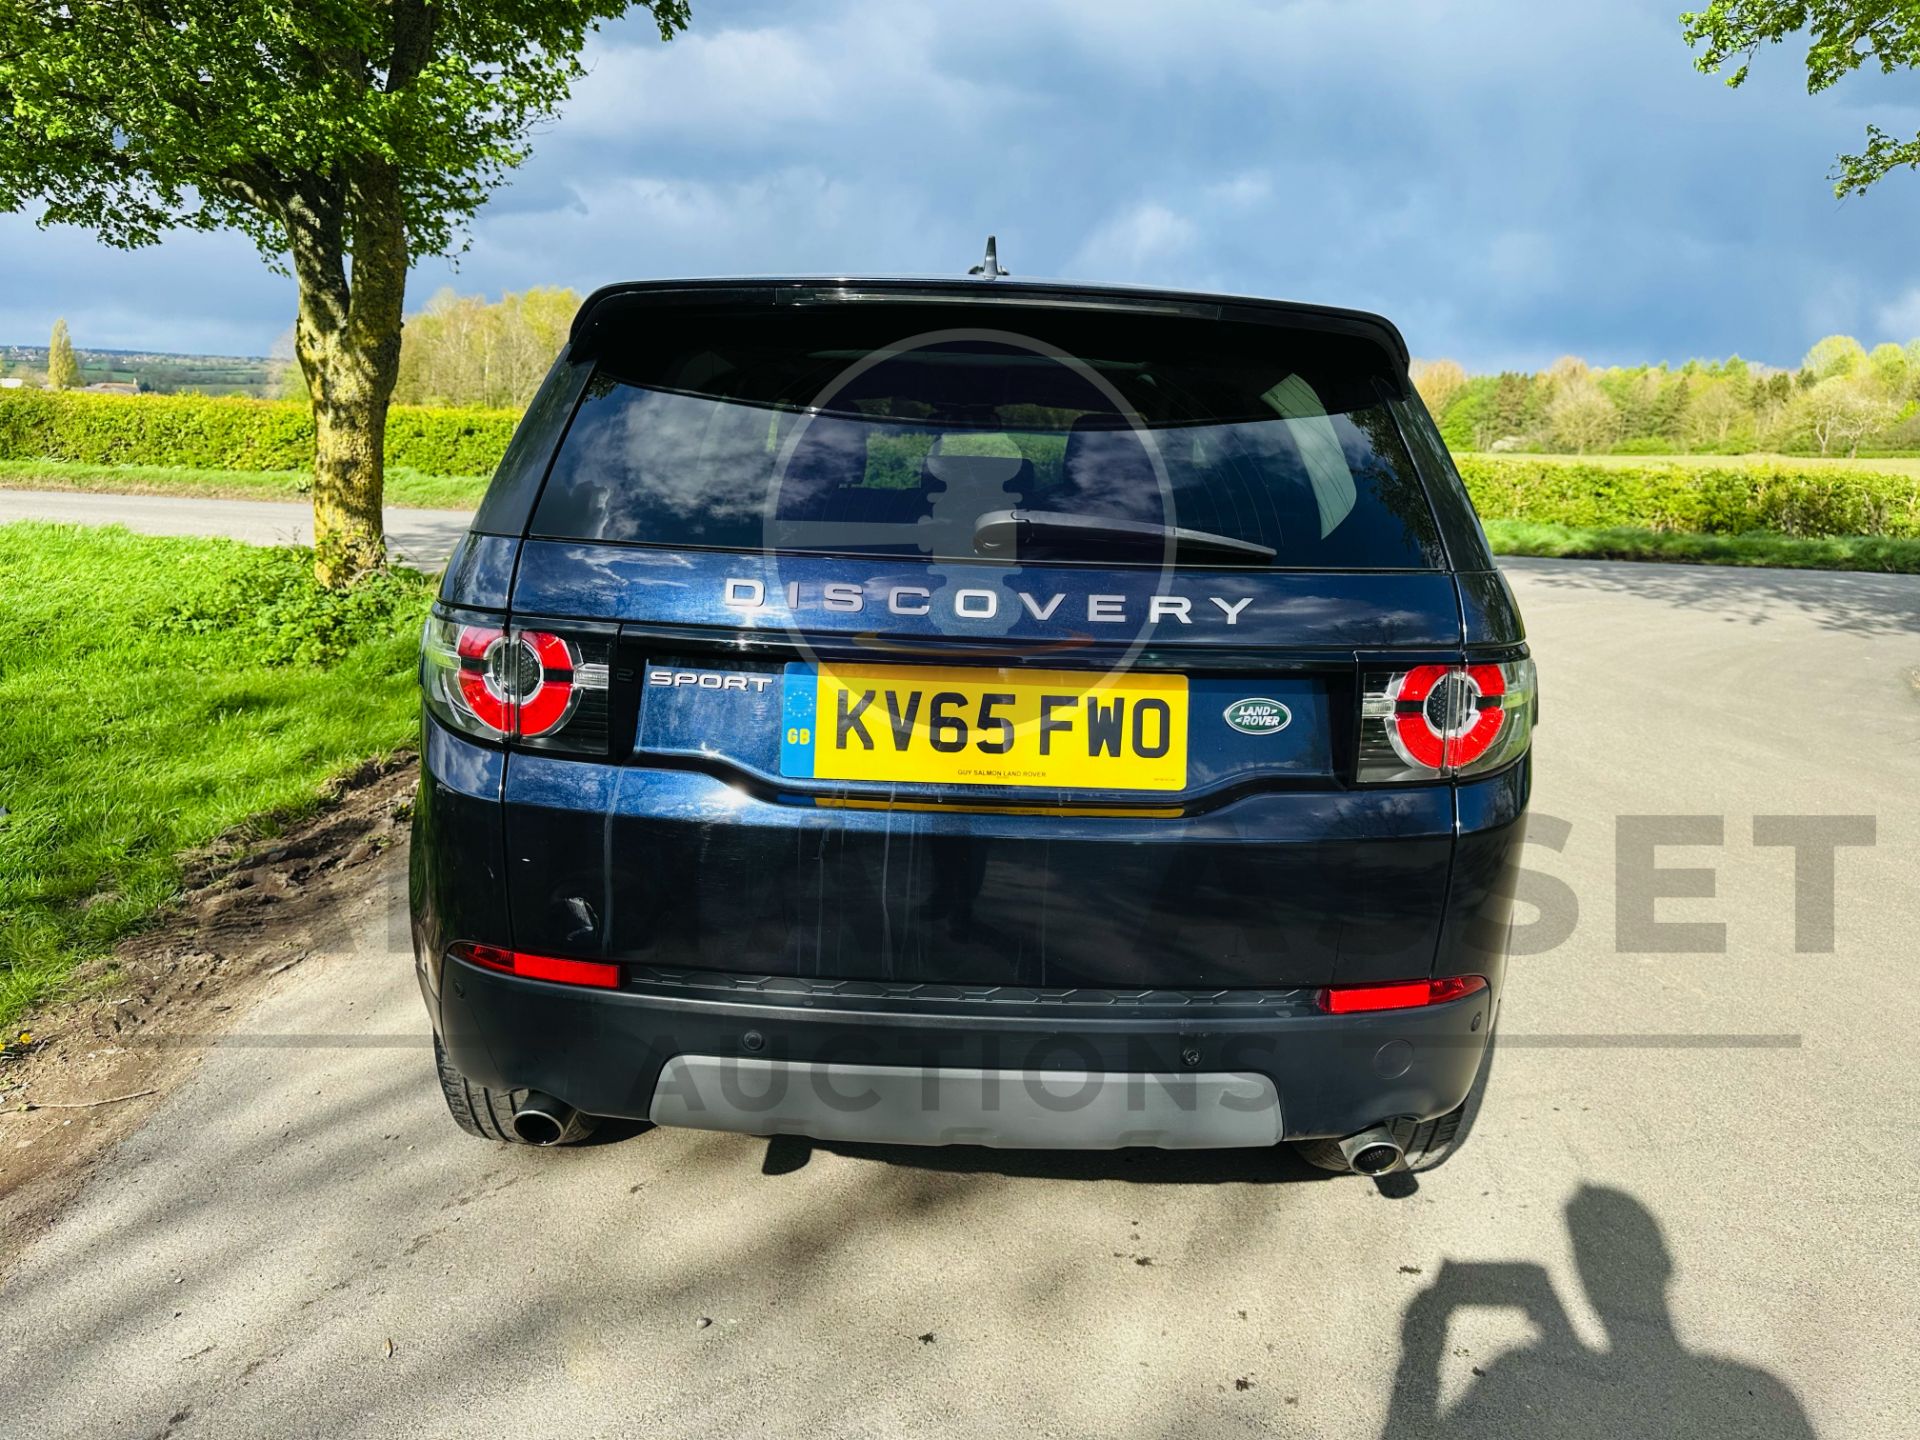 (ON SALE) LAND ROVER DISCOVERY SPORT *SE TECH* 7 SEATER SUV (2016 - EURO 6) 2.0 TD4 - (NO VAT) - Image 8 of 40